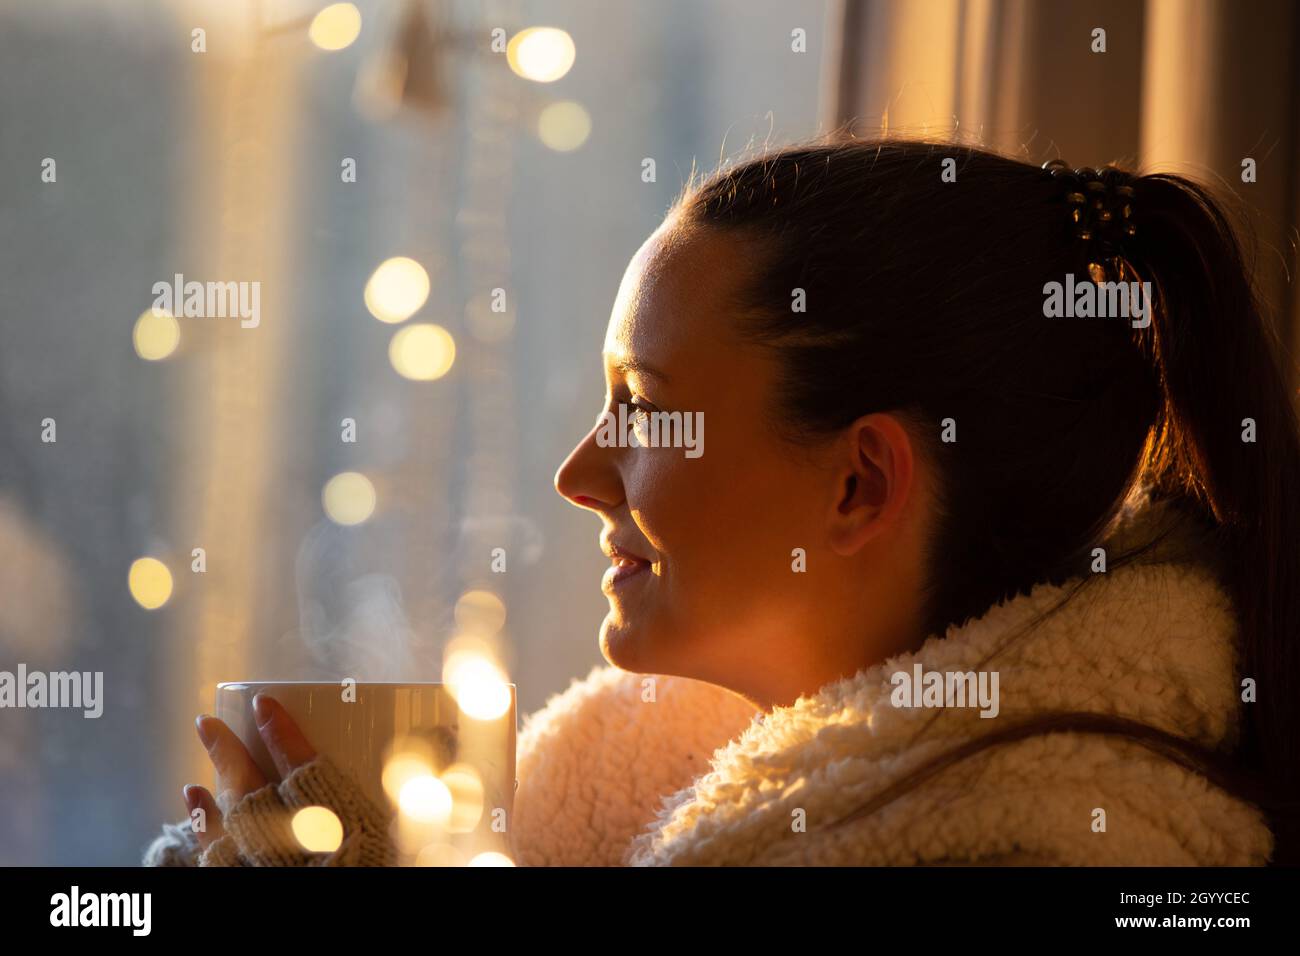 Beautiful girl covered with blanket holding cup of hot coffee with christmas lights in background, Festive moments concept Stock Photo